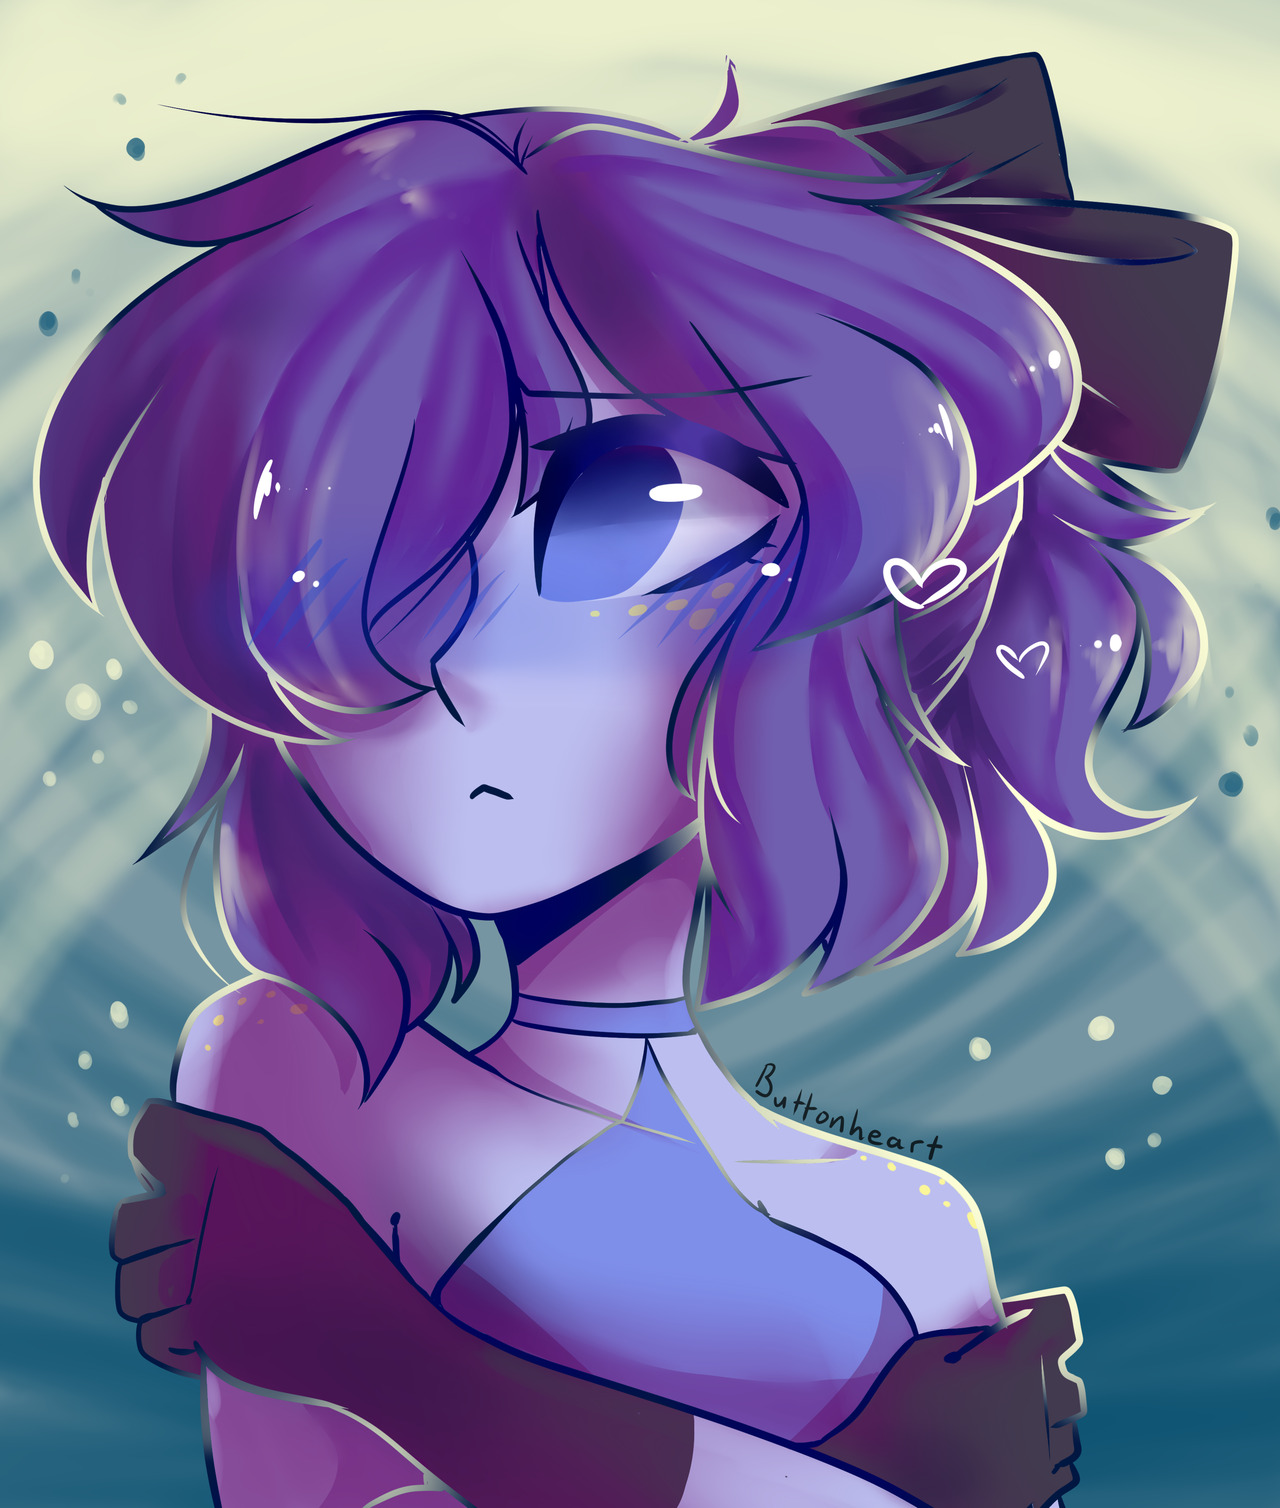 @laliiyeaah ‘s Lapis sona was so cute, I just had to draw her!! I hope you like it